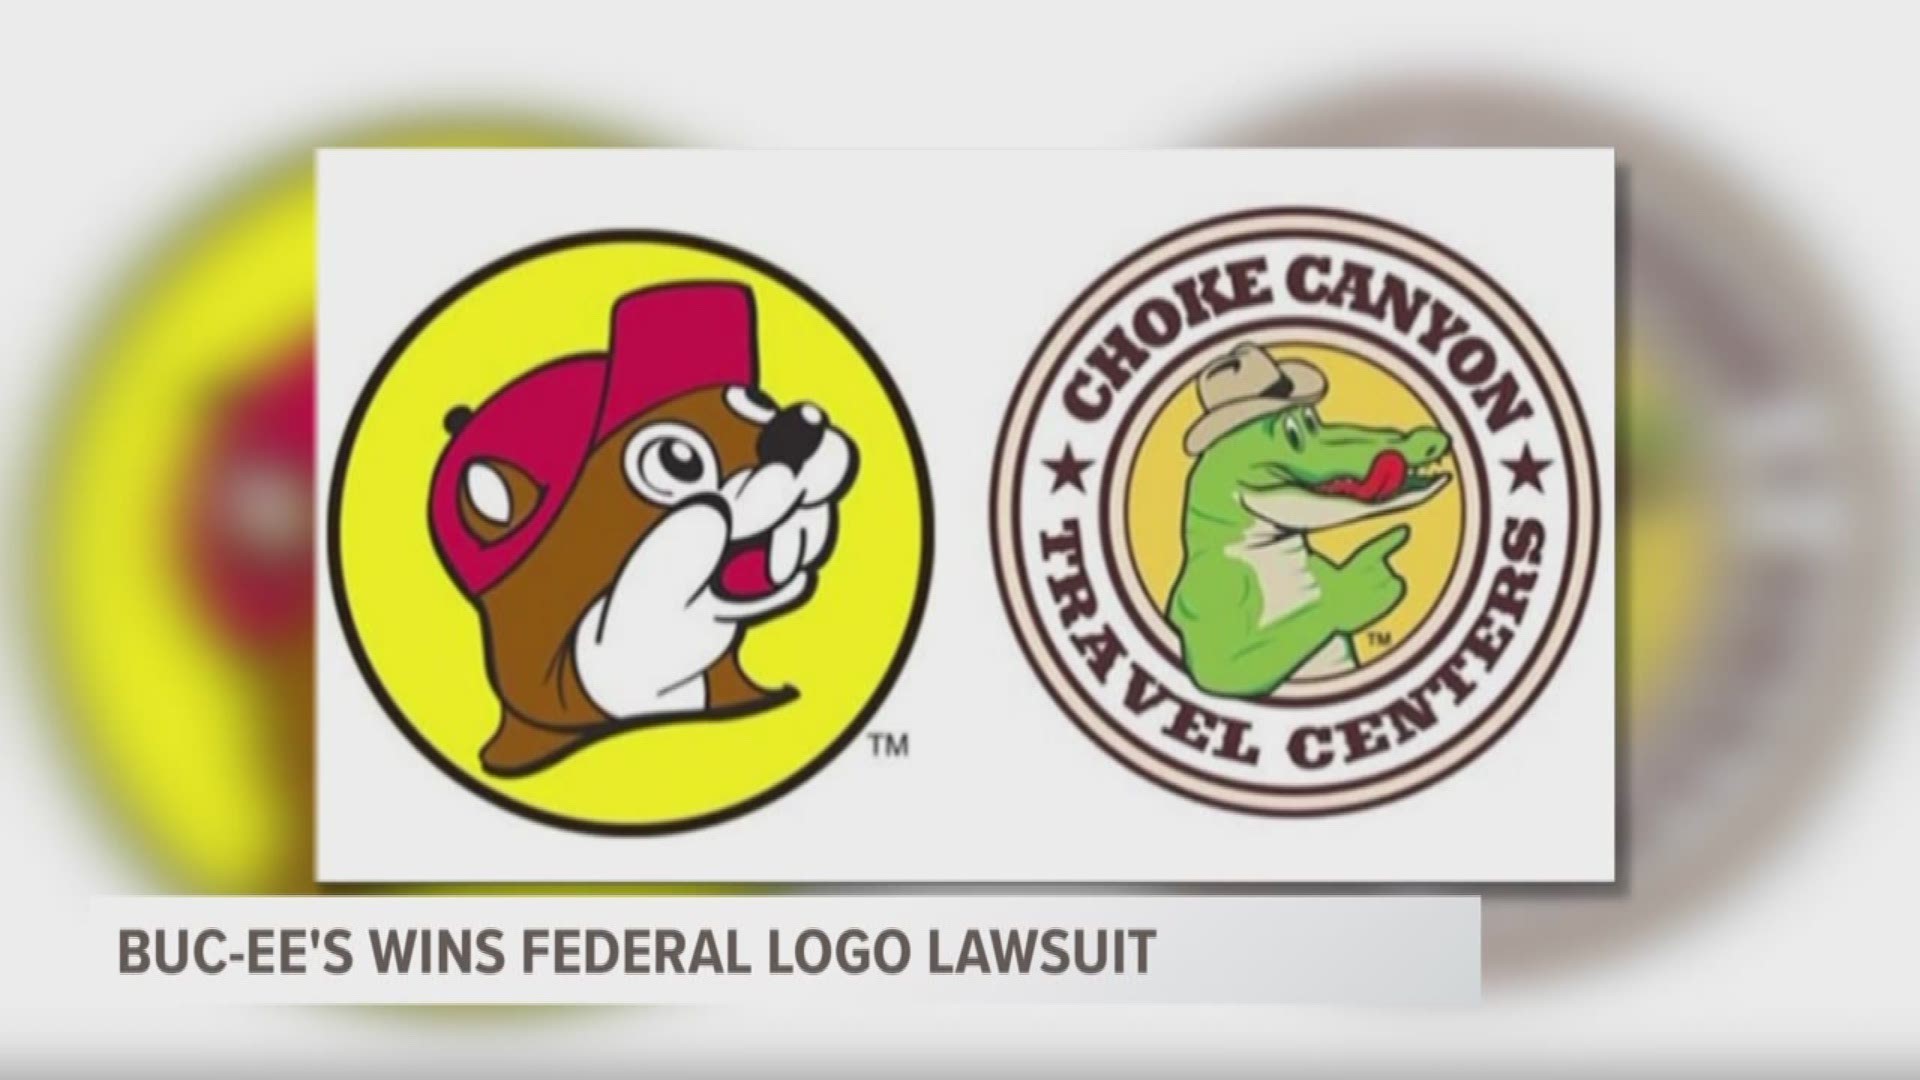 The judge ruled the alligator logo was too similar to the Buc-ee's logo.